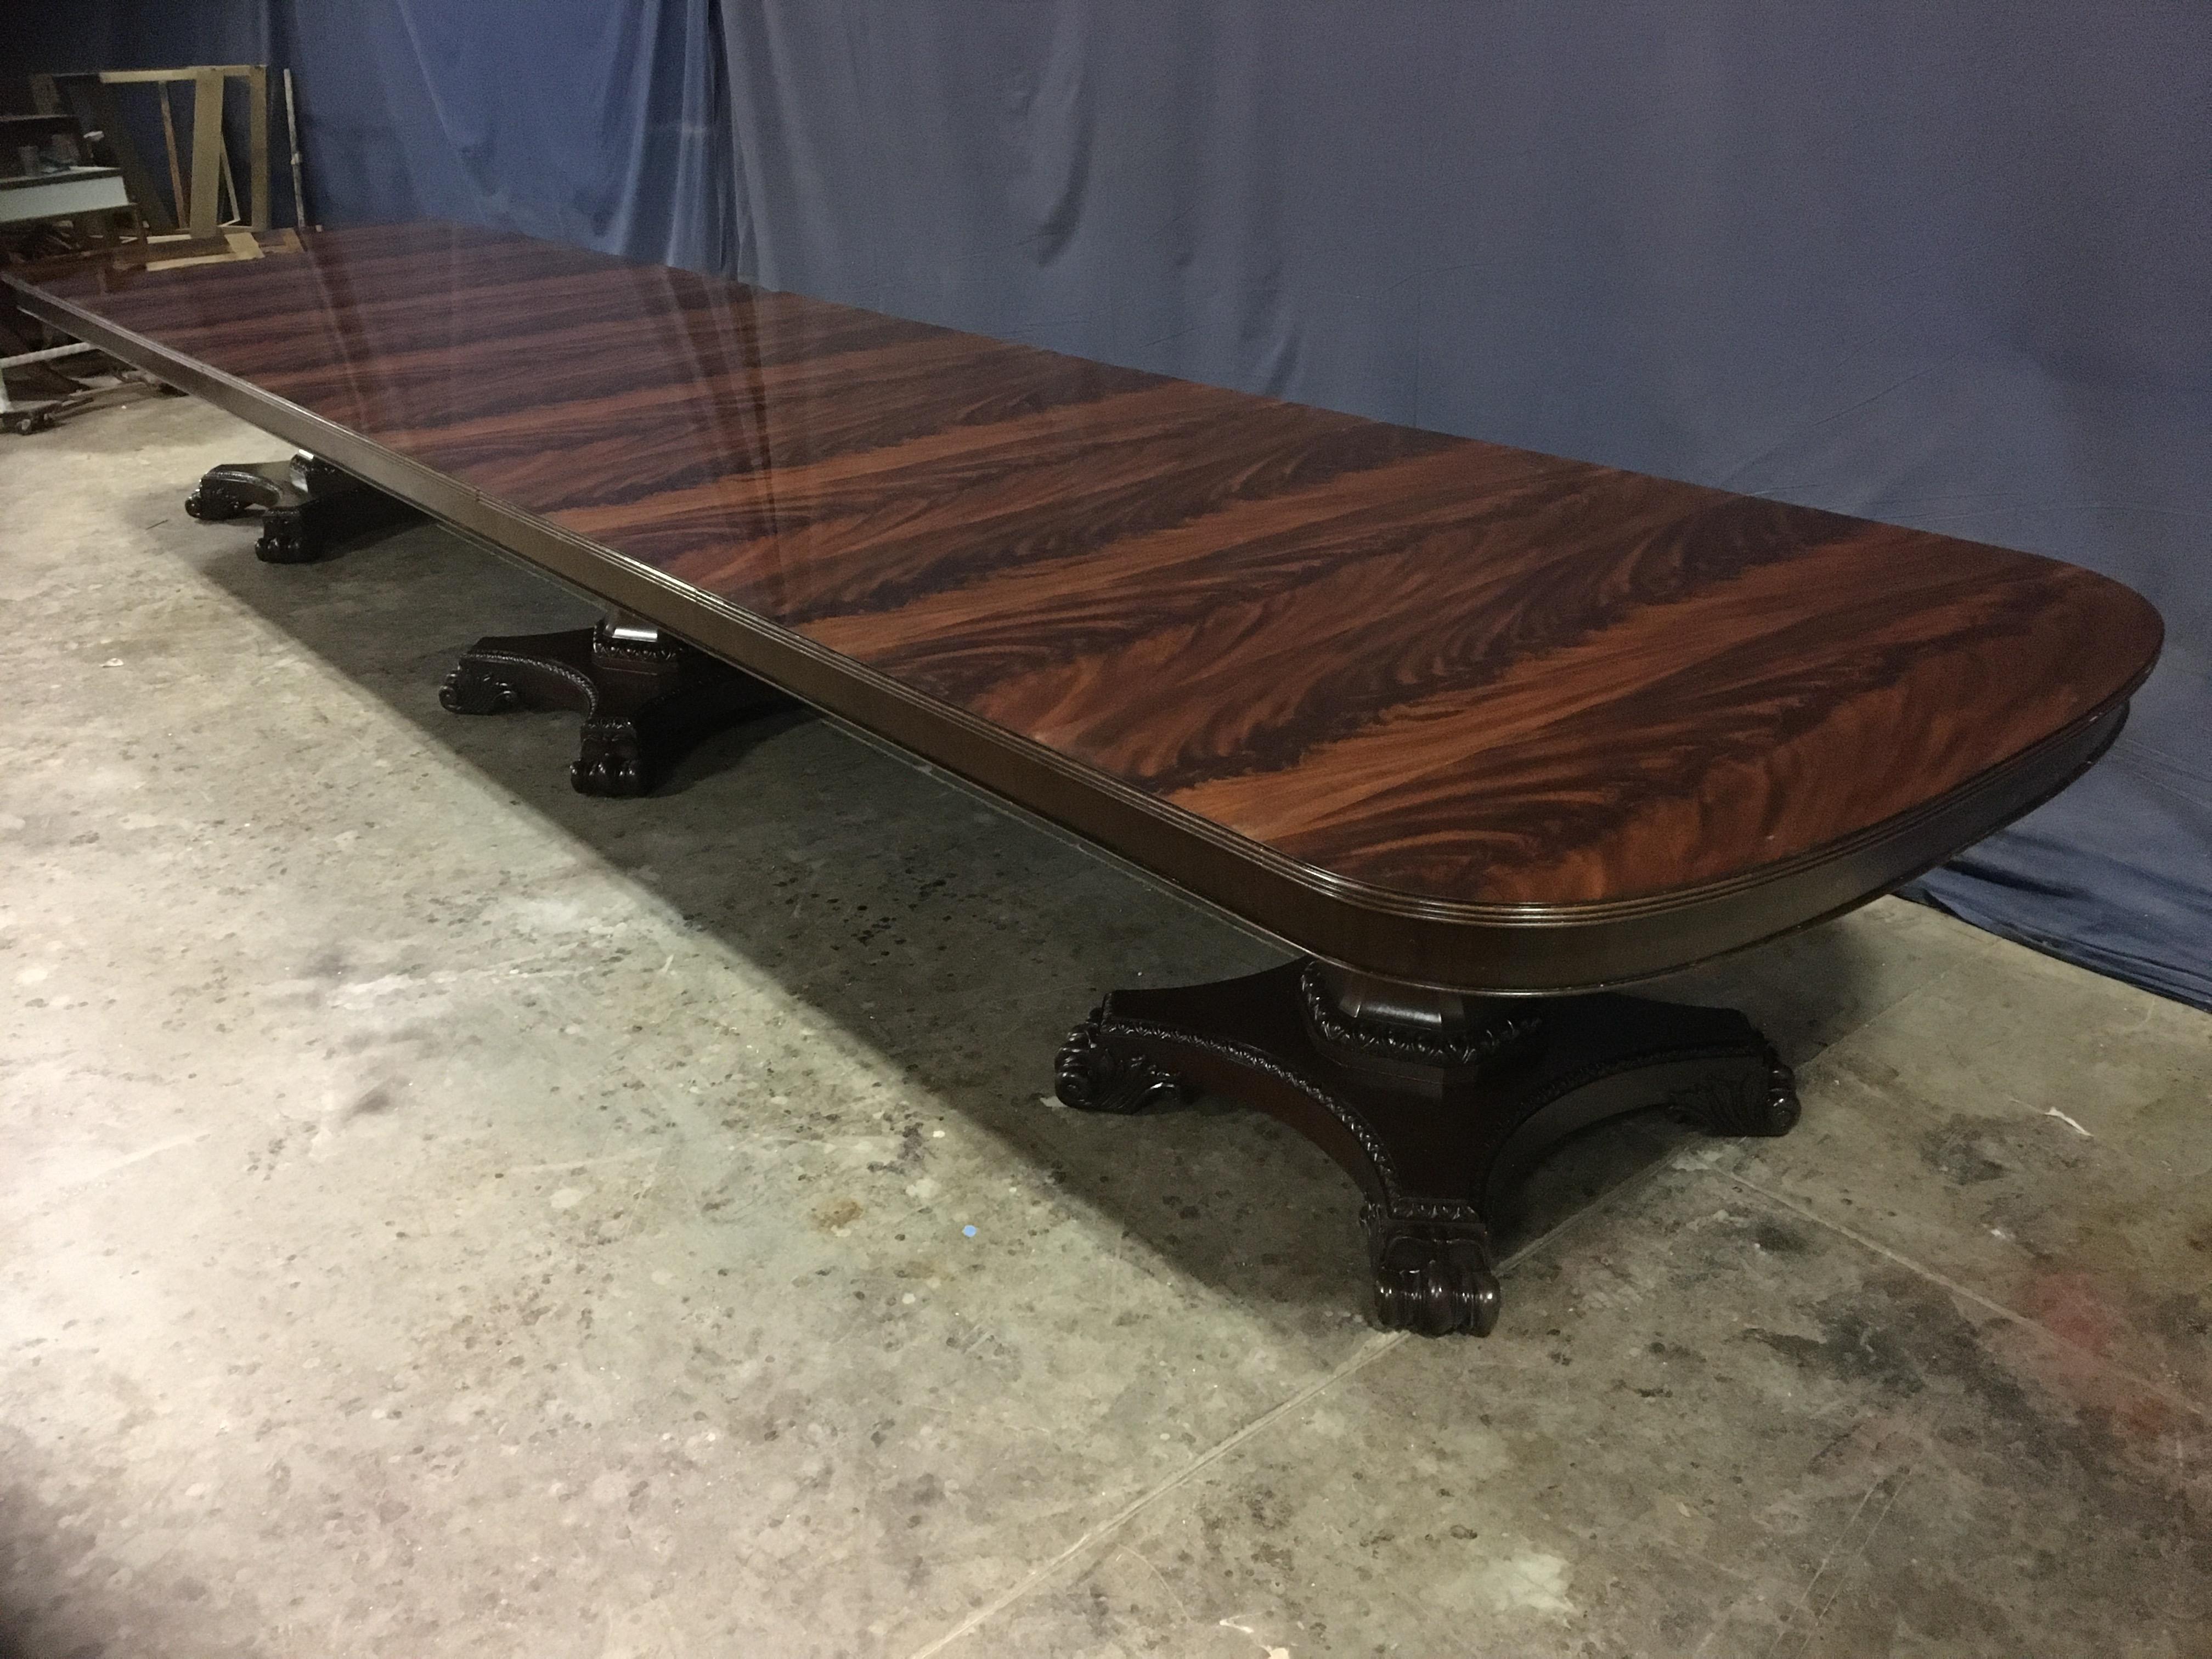 This is a made-to-order large traditional mahogany banquet/dining table made in the Leighton Hall shop. It features a field of reverse slip-matched swirly crotch mahogany from West Africa. It has “D” shaped ends with a solid mahogany three beaded